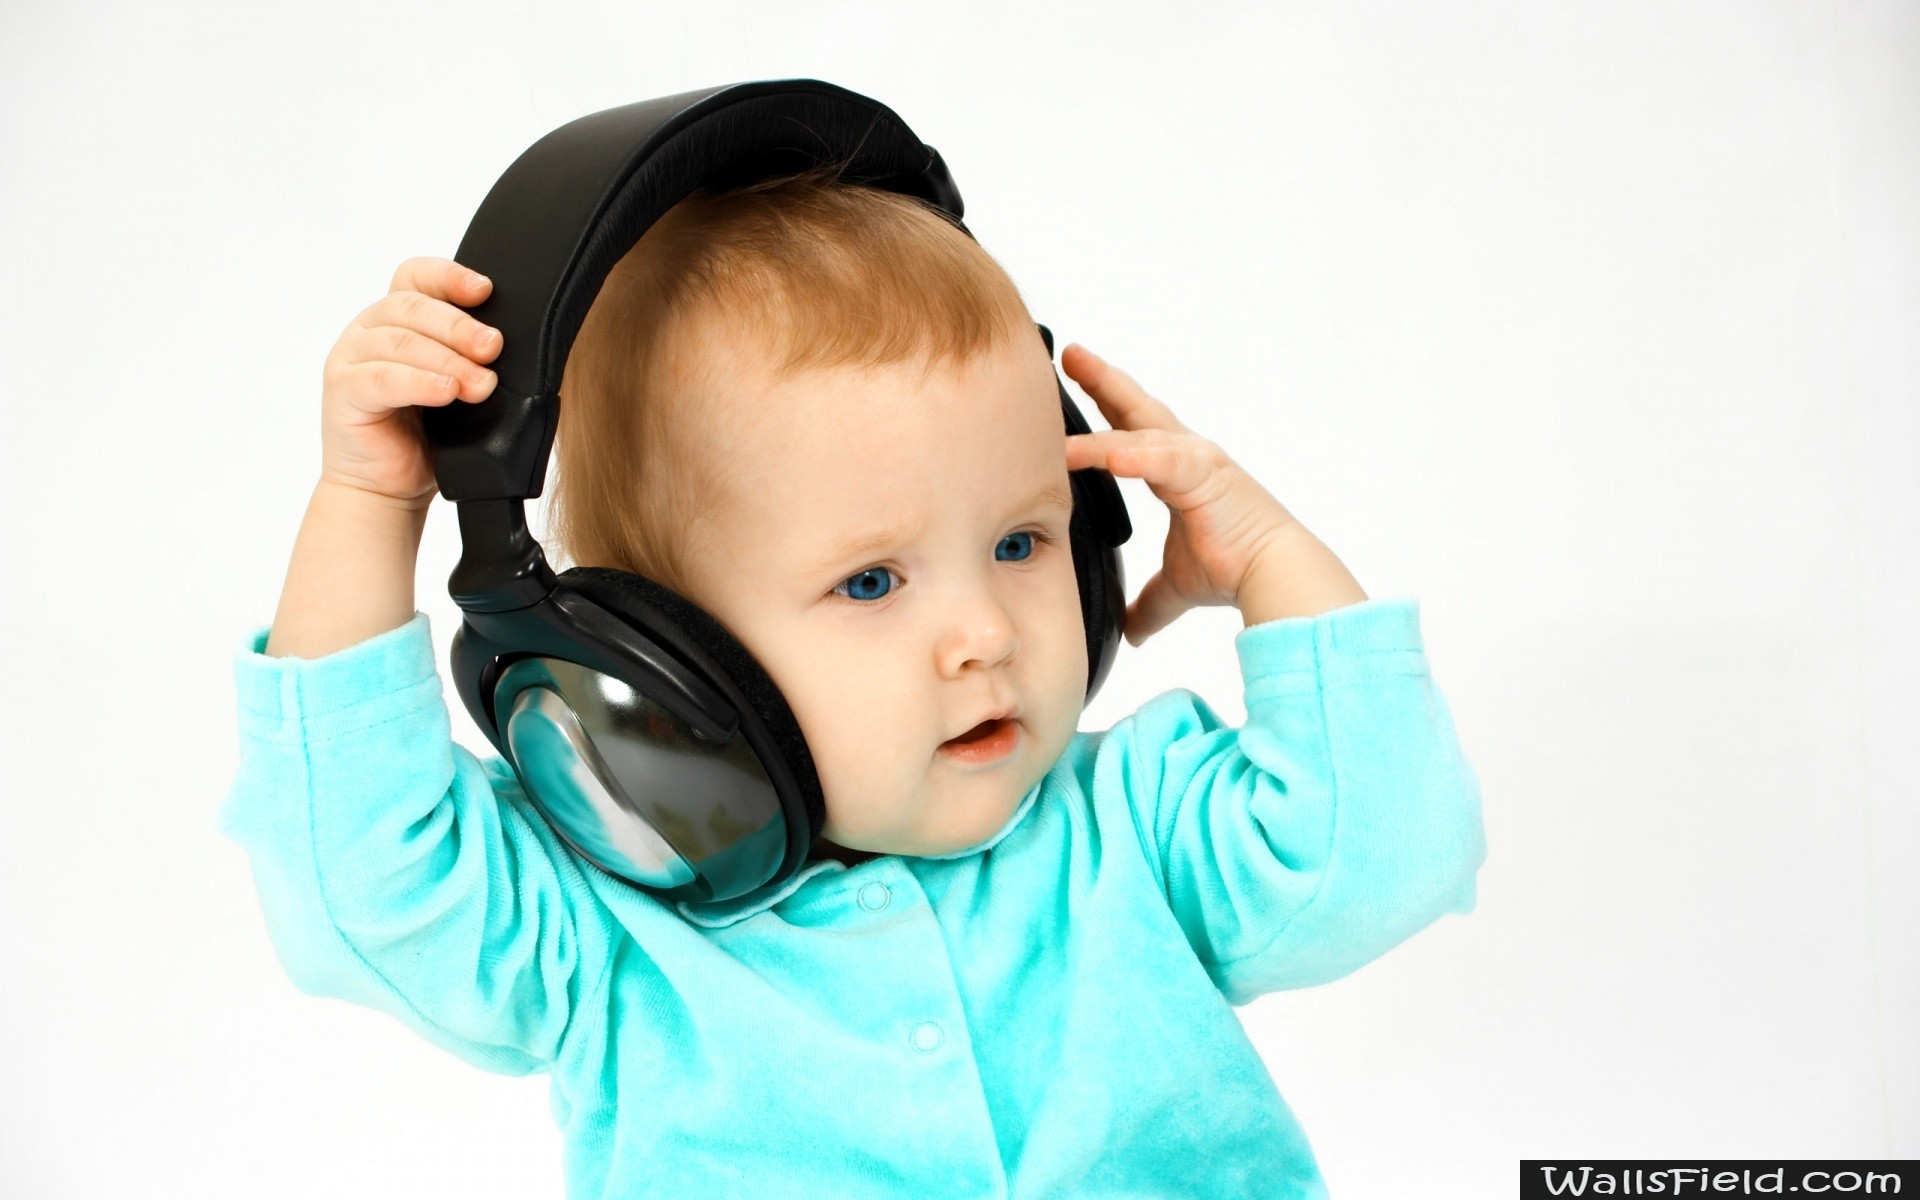 You can view, download and comment on Dj Baby free hd wallpapers for your  desktop